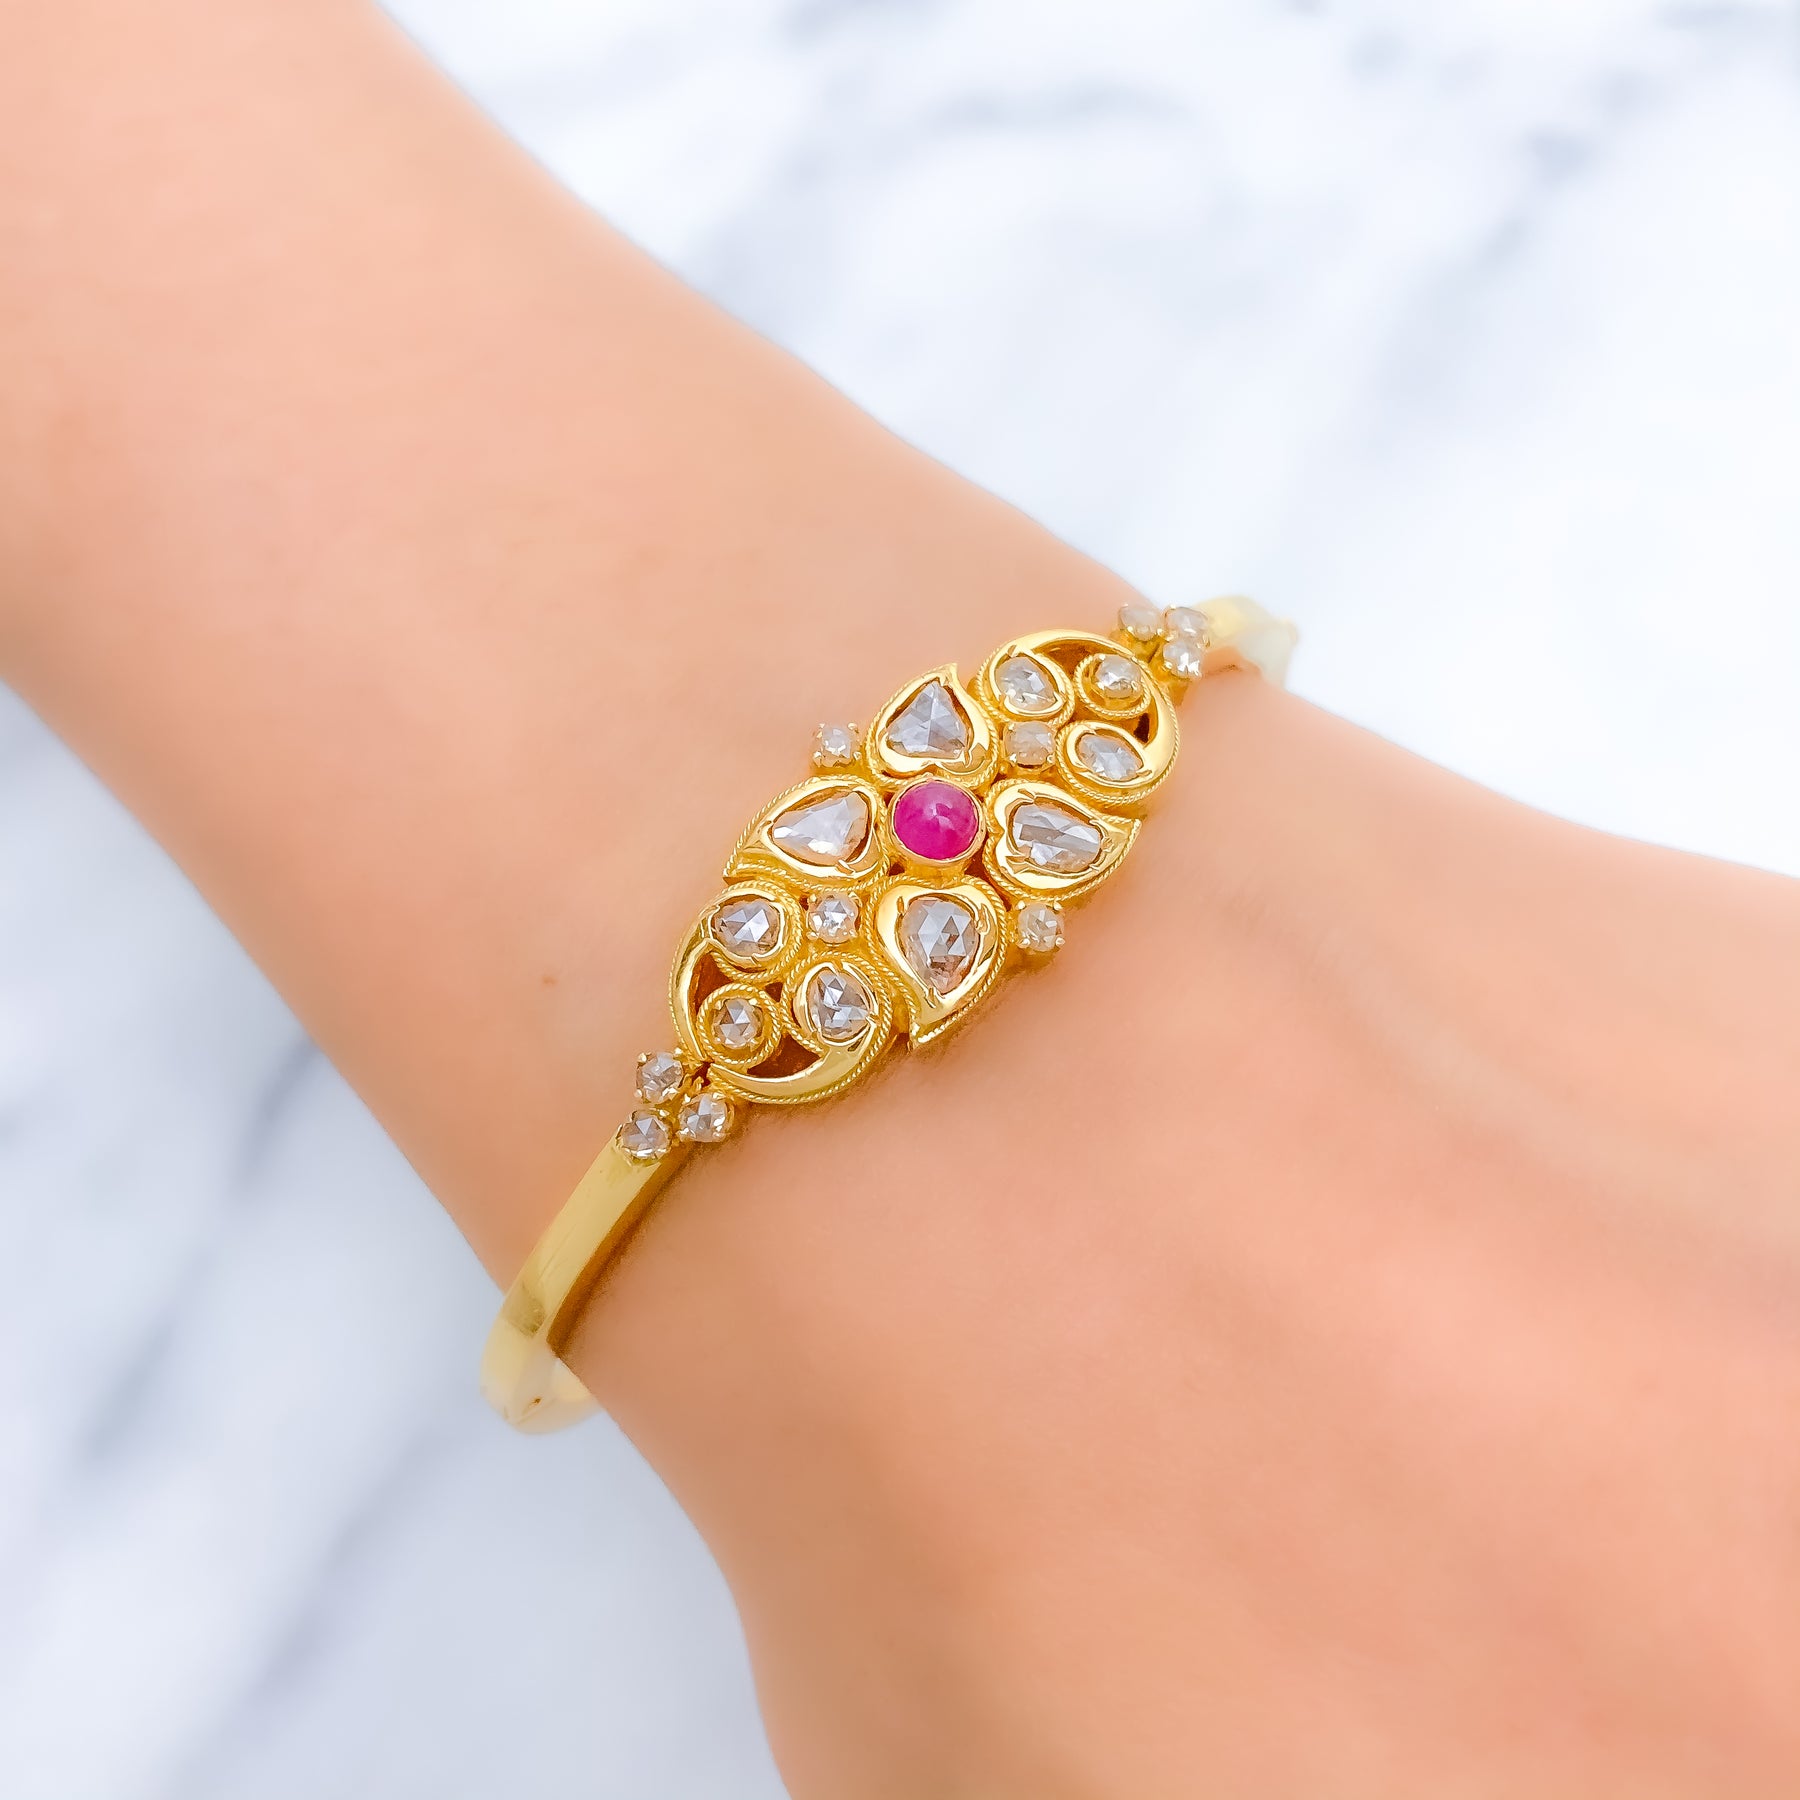 Diamond Bangle Bracelet 'Baby's First Diamond' in 10K Gold Perfect for Boys  and Girls Newborn to 3 Y - Walmart.com